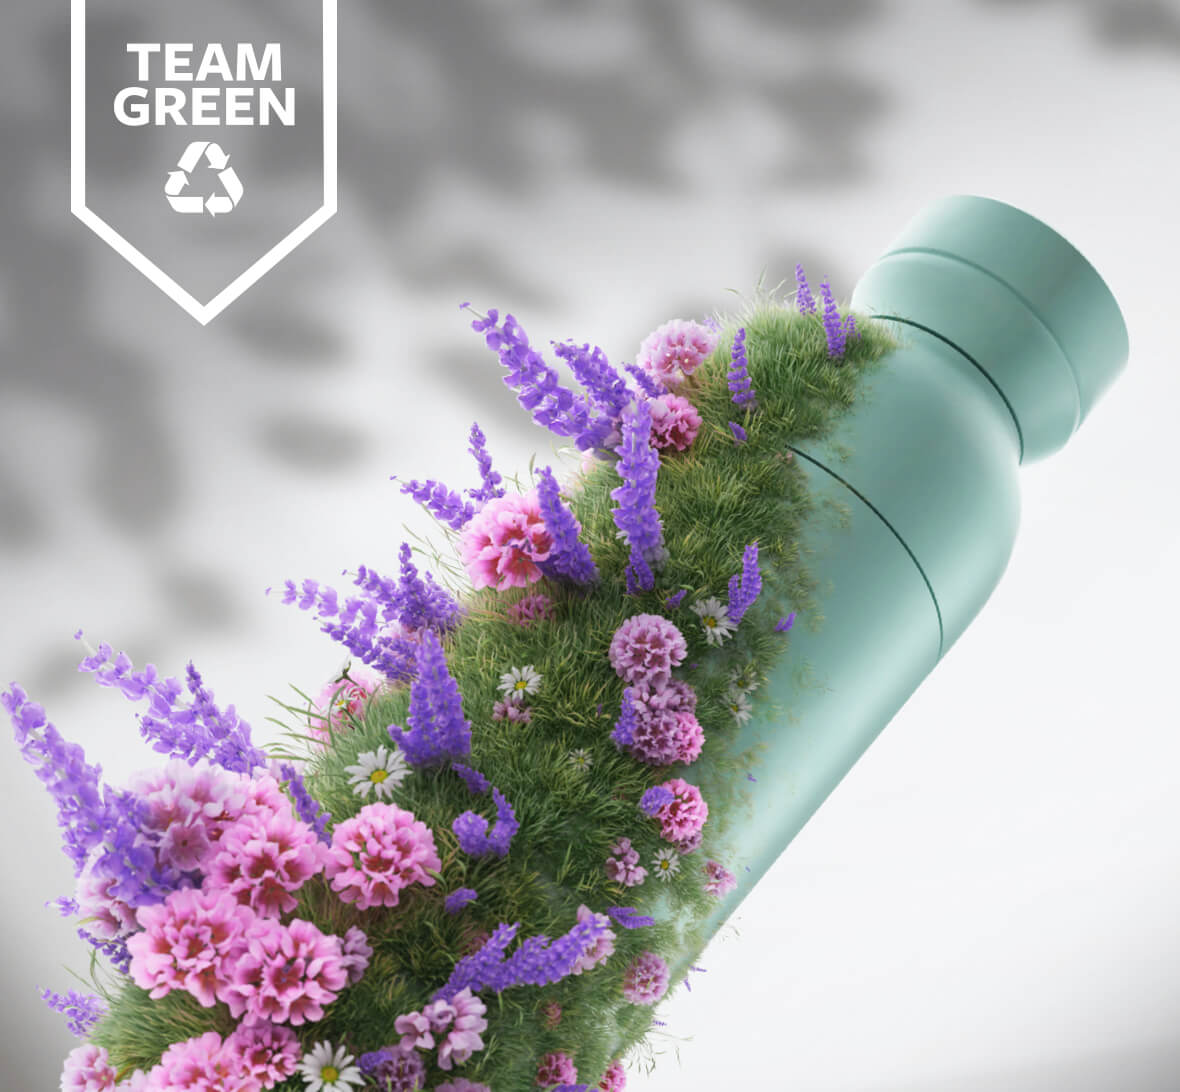 A a green plastic bottle with flowers growing on its surface. The Team Green logos is in the top left hand corner.